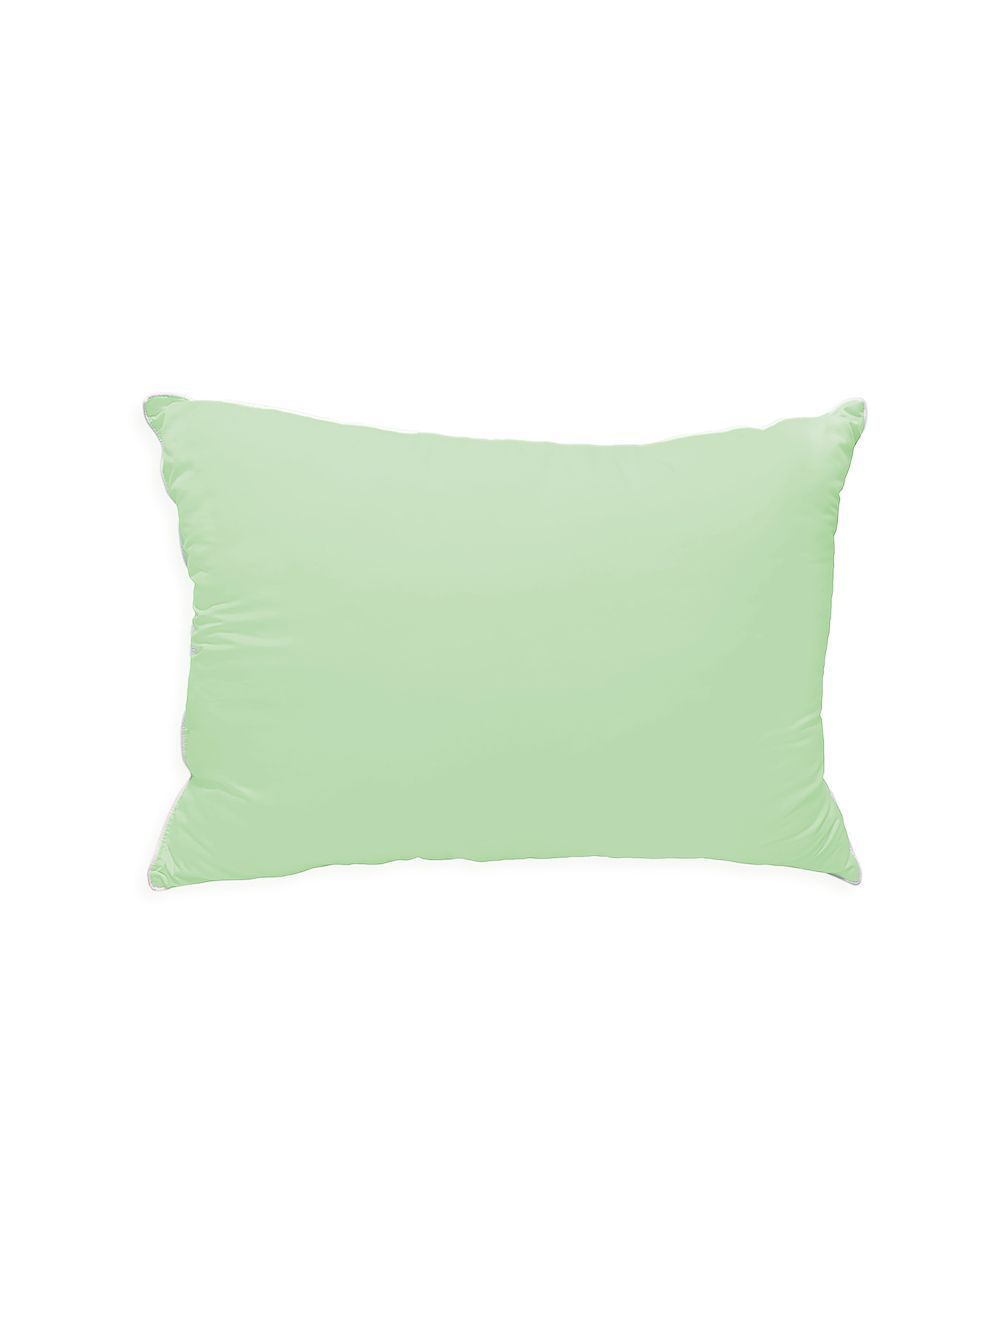 Rahalife Soft, Smooth Bed Pillow With White Piping Microfiber Mint Green 50x70cm-AW/MG/70